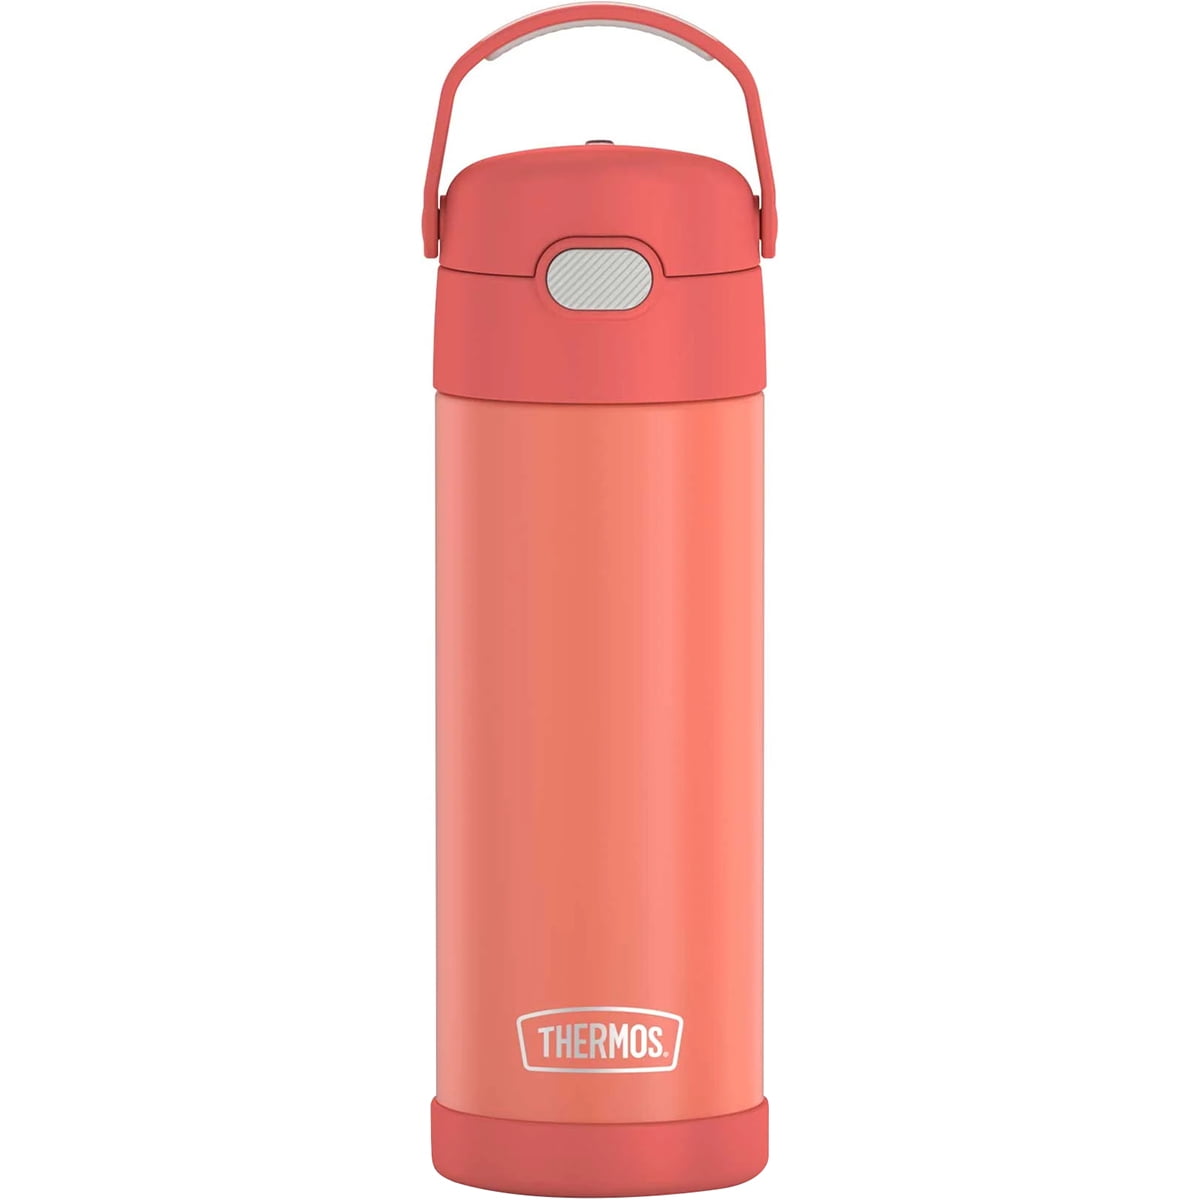 1 Original Thermos Brand Aluminum Thermos W/ Ribbed Sides, Cork Stopper  &red Plastic Cap/ Cup vintage QT Metal Thermos grand Vacuum Bottle 